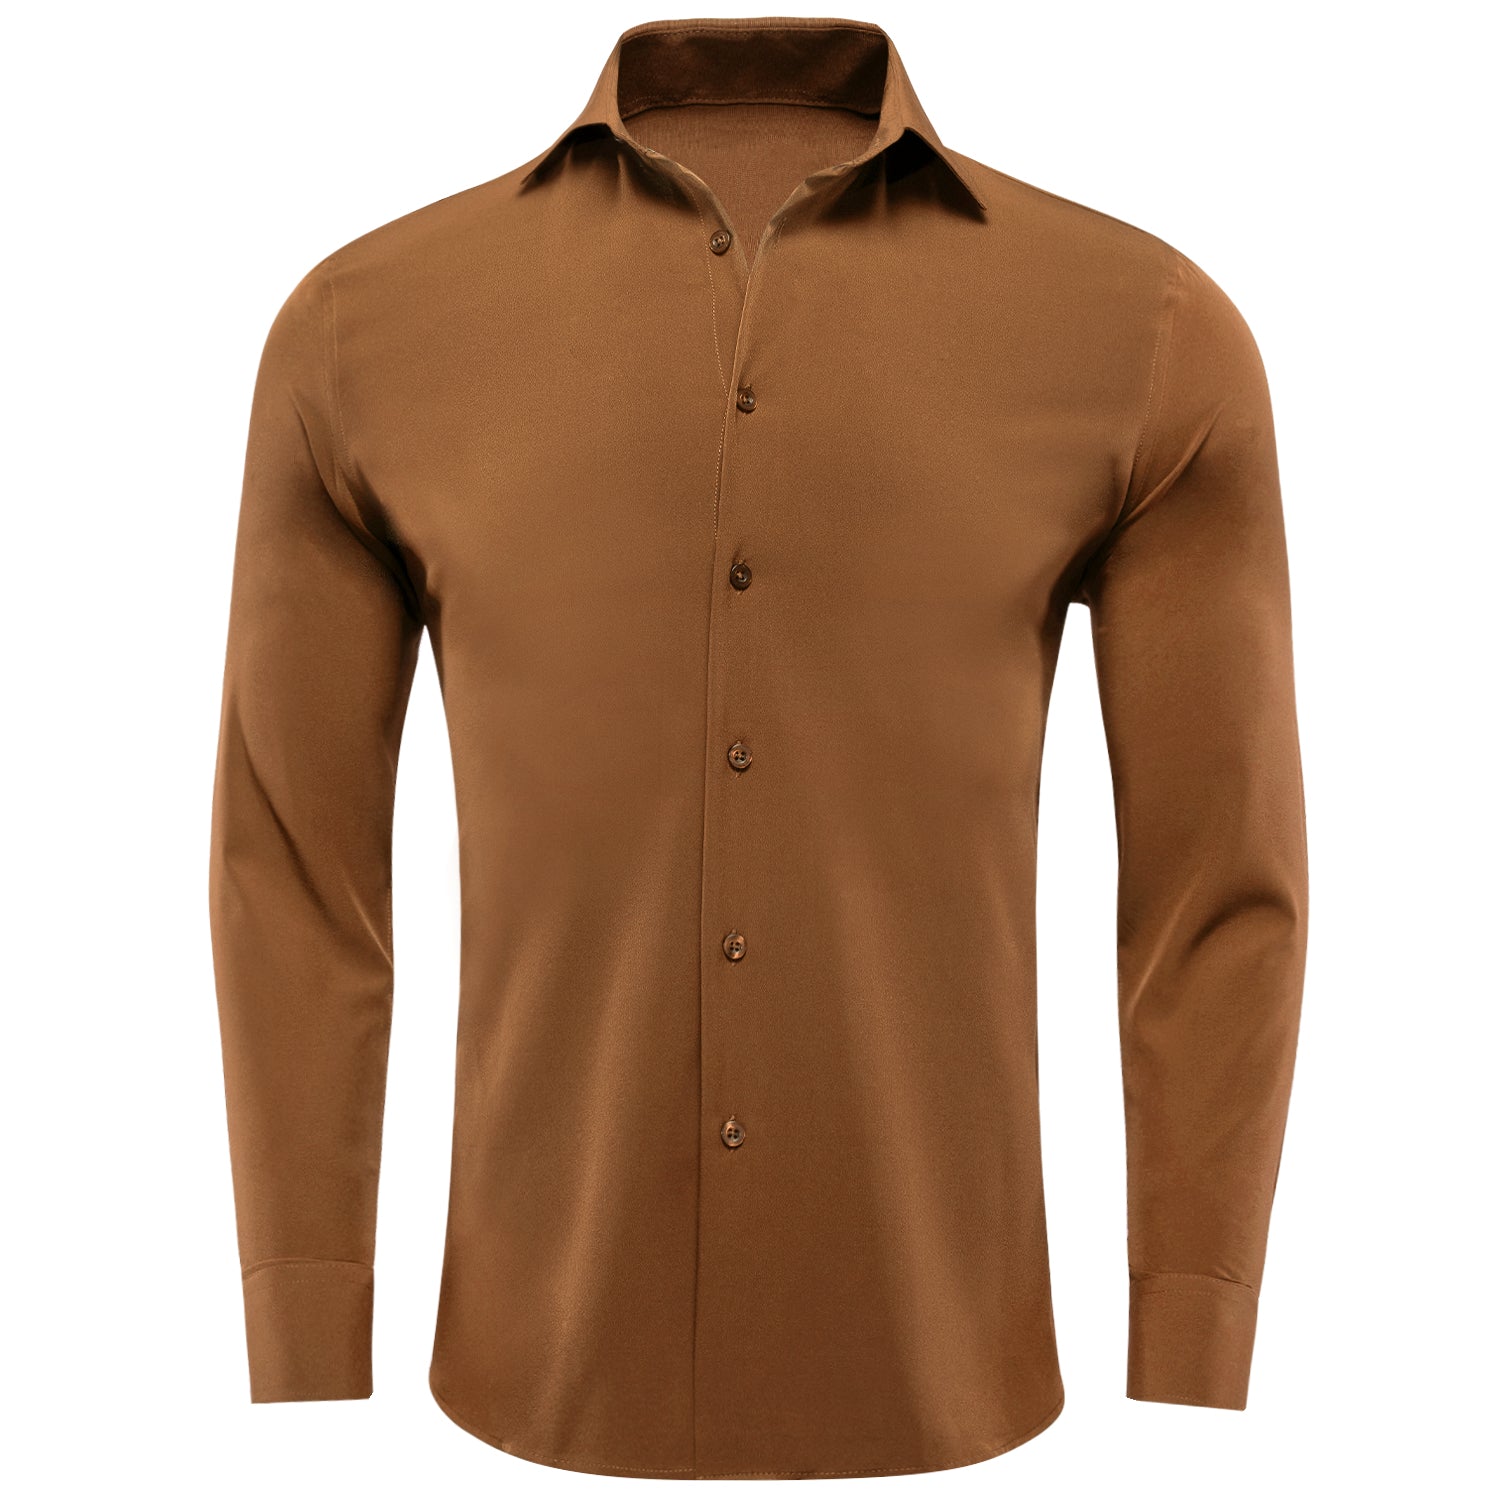 New Brown Solid Stretch Men's Long Sleeve Shirt